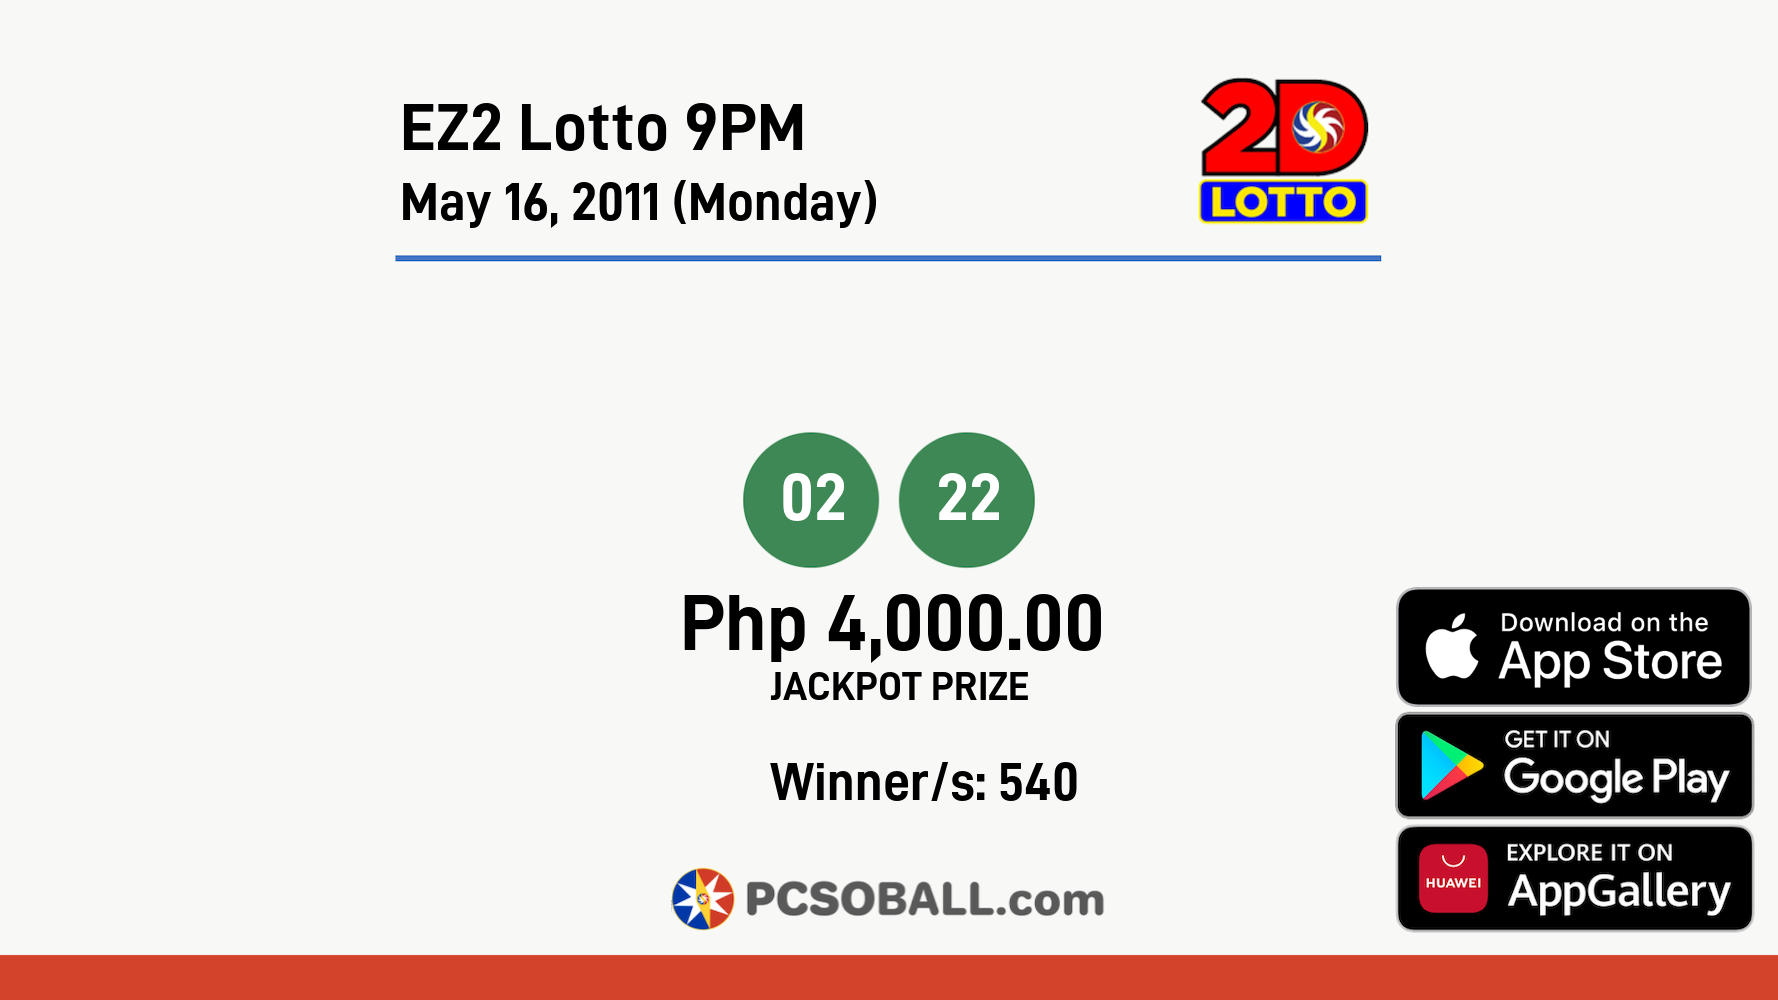 EZ2 Lotto 9PM May 16, 2011 (Monday) Result